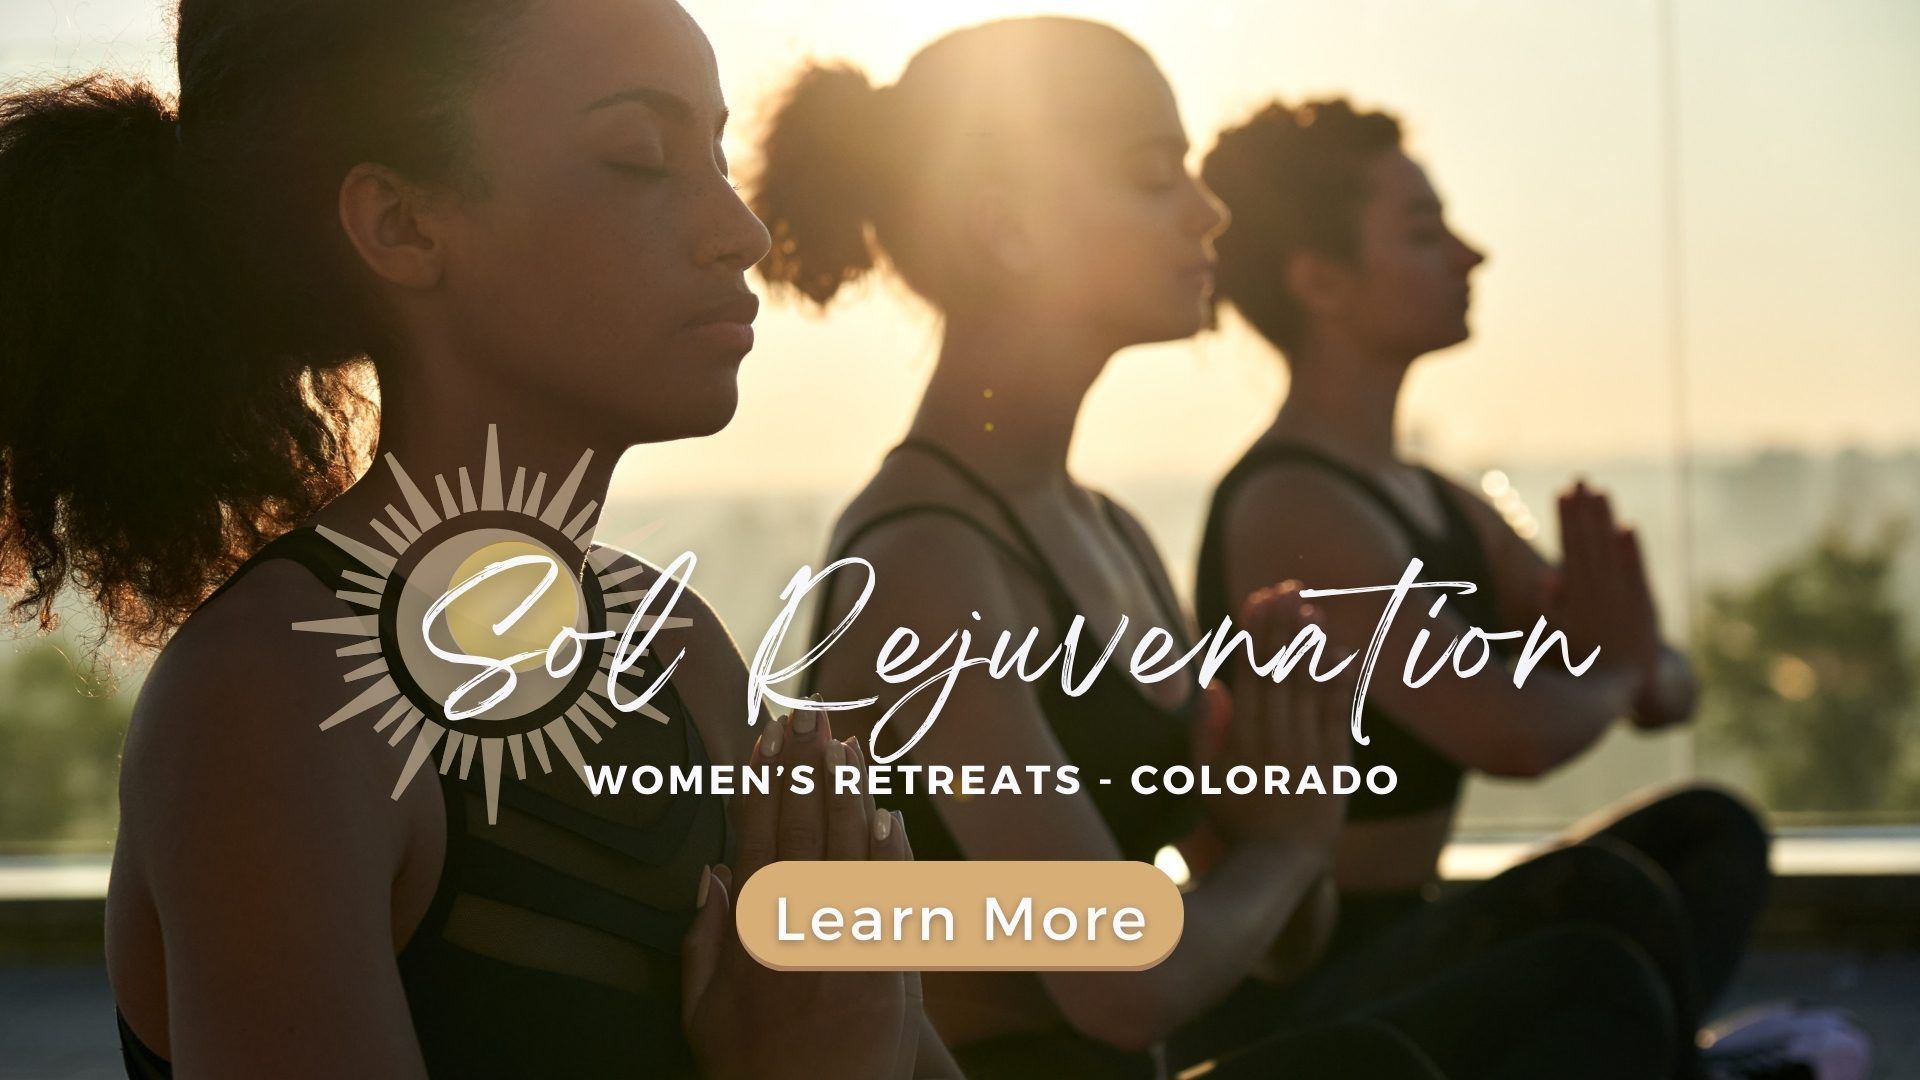 A women's retreat to heal and learn - Dena Gould is one of the speakers